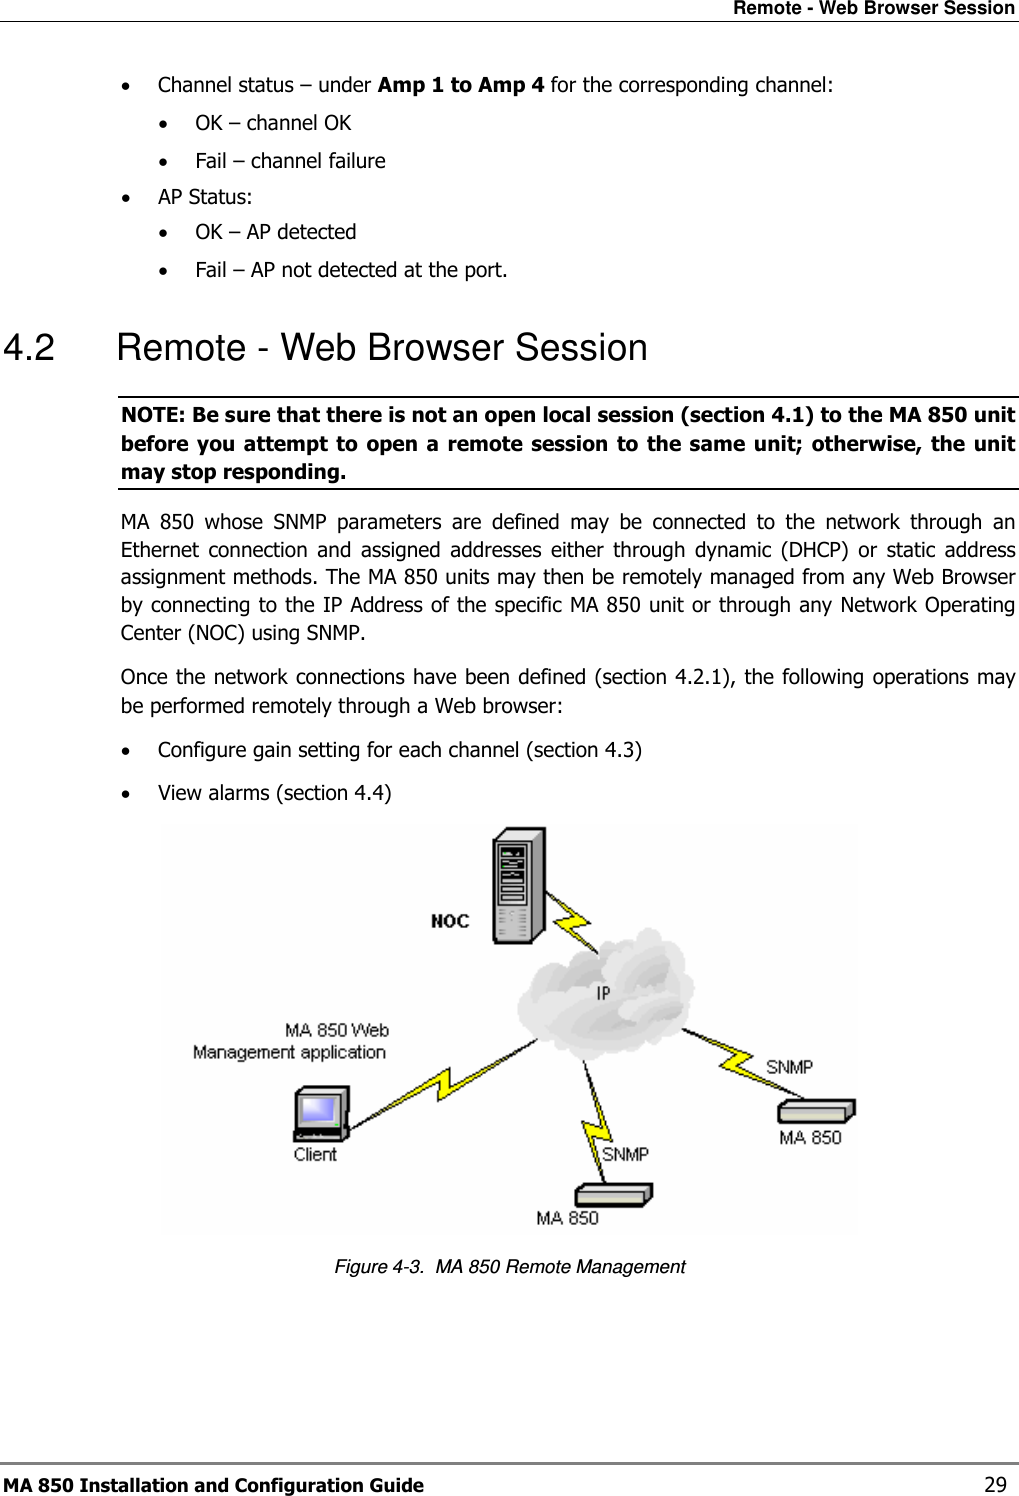 Remote - Web Browser Session MA 850 Installation and Configuration Guide    29 • Channel status – under Amp 1 to Amp 4 for the corresponding channel: • OK – channel OK • Fail – channel failure • AP Status: • OK – AP detected • Fail – AP not detected at the port. 4.2  Remote - Web Browser Session NOTE: Be sure that there is not an open local session (section  4.1) to the MA 850 unit before you attempt to  open  a  remote  session  to  the  same  unit;  otherwise,  the  unit may stop responding. MA  850  whose  SNMP  parameters  are  defined  may  be  connected  to  the  network  through  an Ethernet  connection  and  assigned  addresses  either  through  dynamic  (DHCP)  or  static  address assignment methods. The MA 850 units may then be remotely managed from any Web Browser by connecting to the IP Address of the specific MA 850 unit or through any Network Operating Center (NOC) using SNMP.   Once the network connections have been defined (section  4.2.1), the following operations may be performed remotely through a Web browser:  • Configure gain setting for each channel (section  4.3) • View alarms (section  4.4)  Figure  4-3.  MA 850 Remote Management  